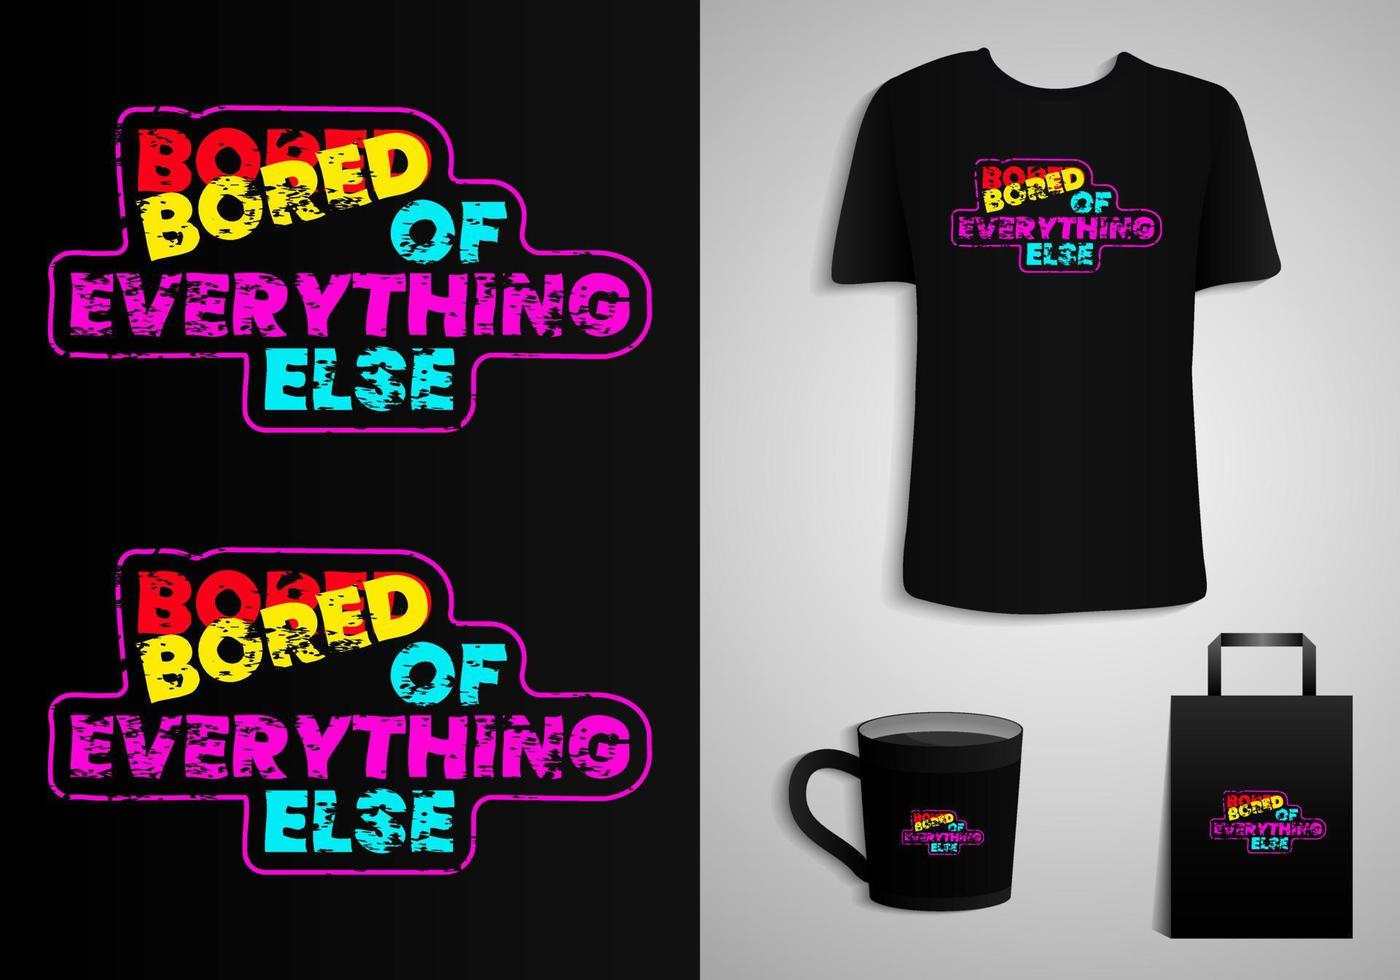 Bored of everything else. Typography Poster, T-shirt, Mug, Tote bag, Merchandise Printable. vector